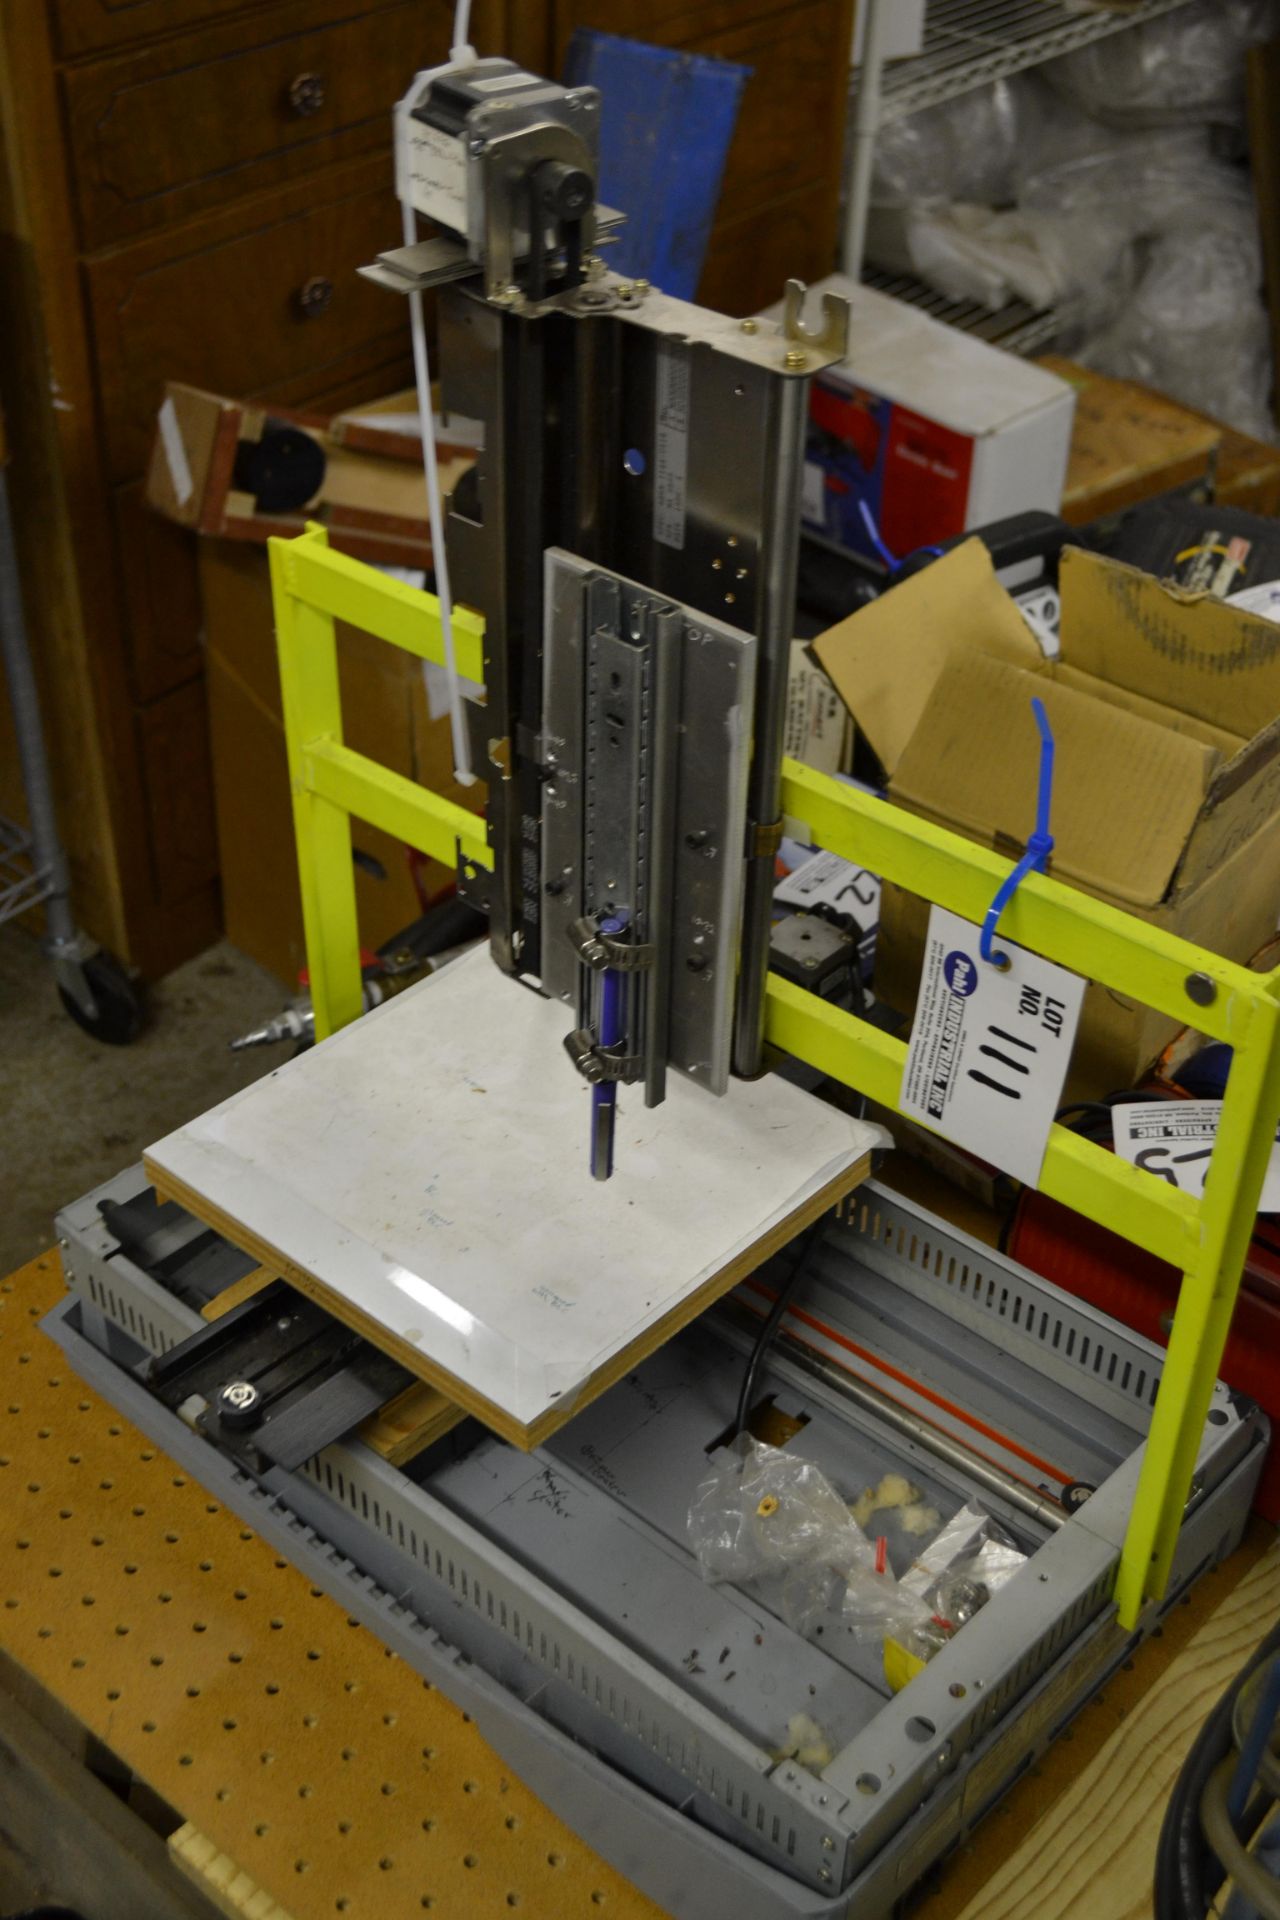 Shop Made CNC Design Table - Image 6 of 6